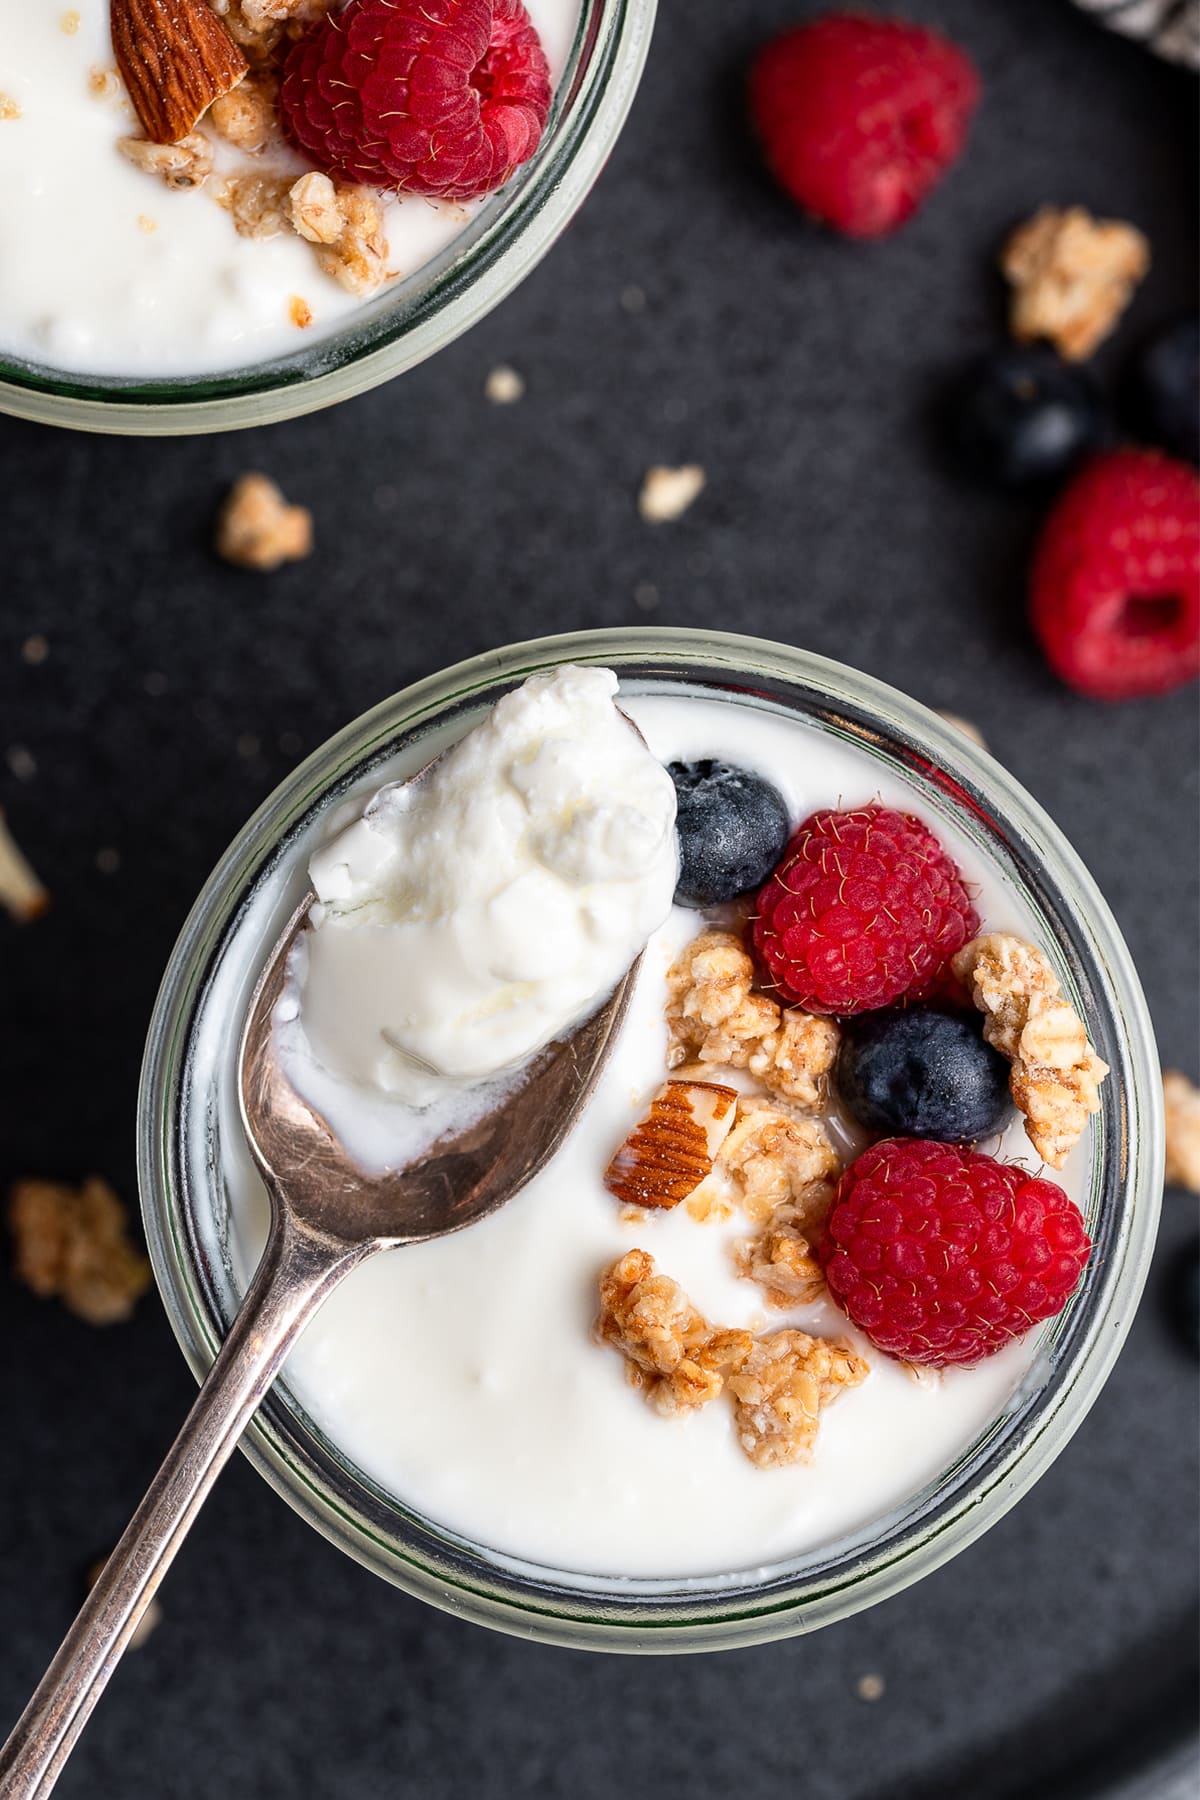 Spoon full of yogurt from a cup topped with granola and berries